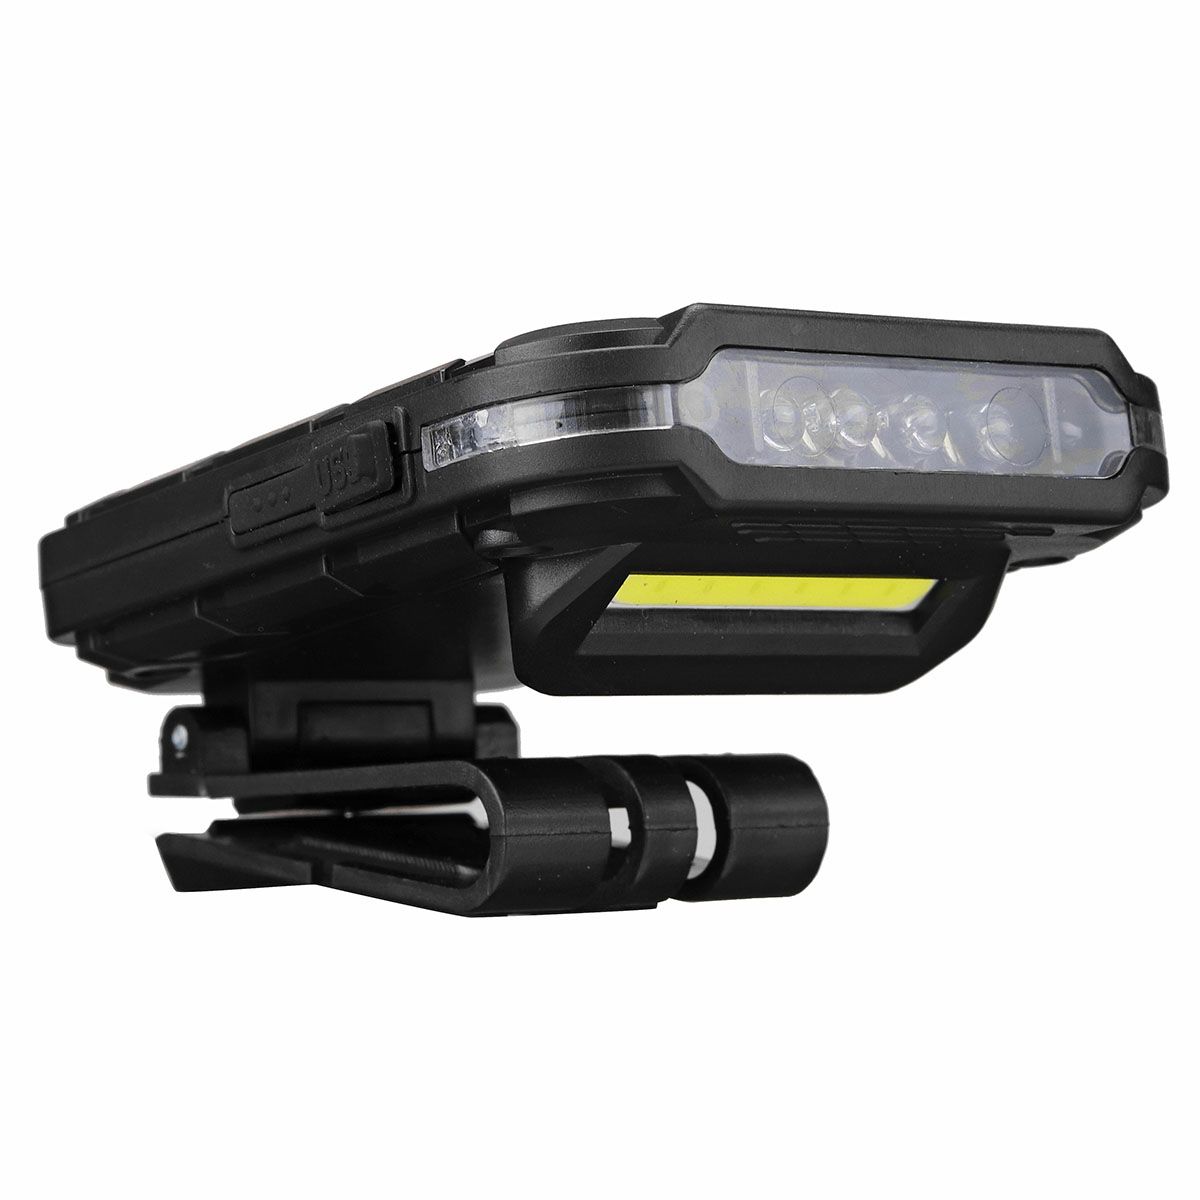 4-LED-Clip-on-Cap-Headlamp-2-Modes-USB-Rechargeable-Work-Light-Camping-Hunting-Torch-Light-1635051